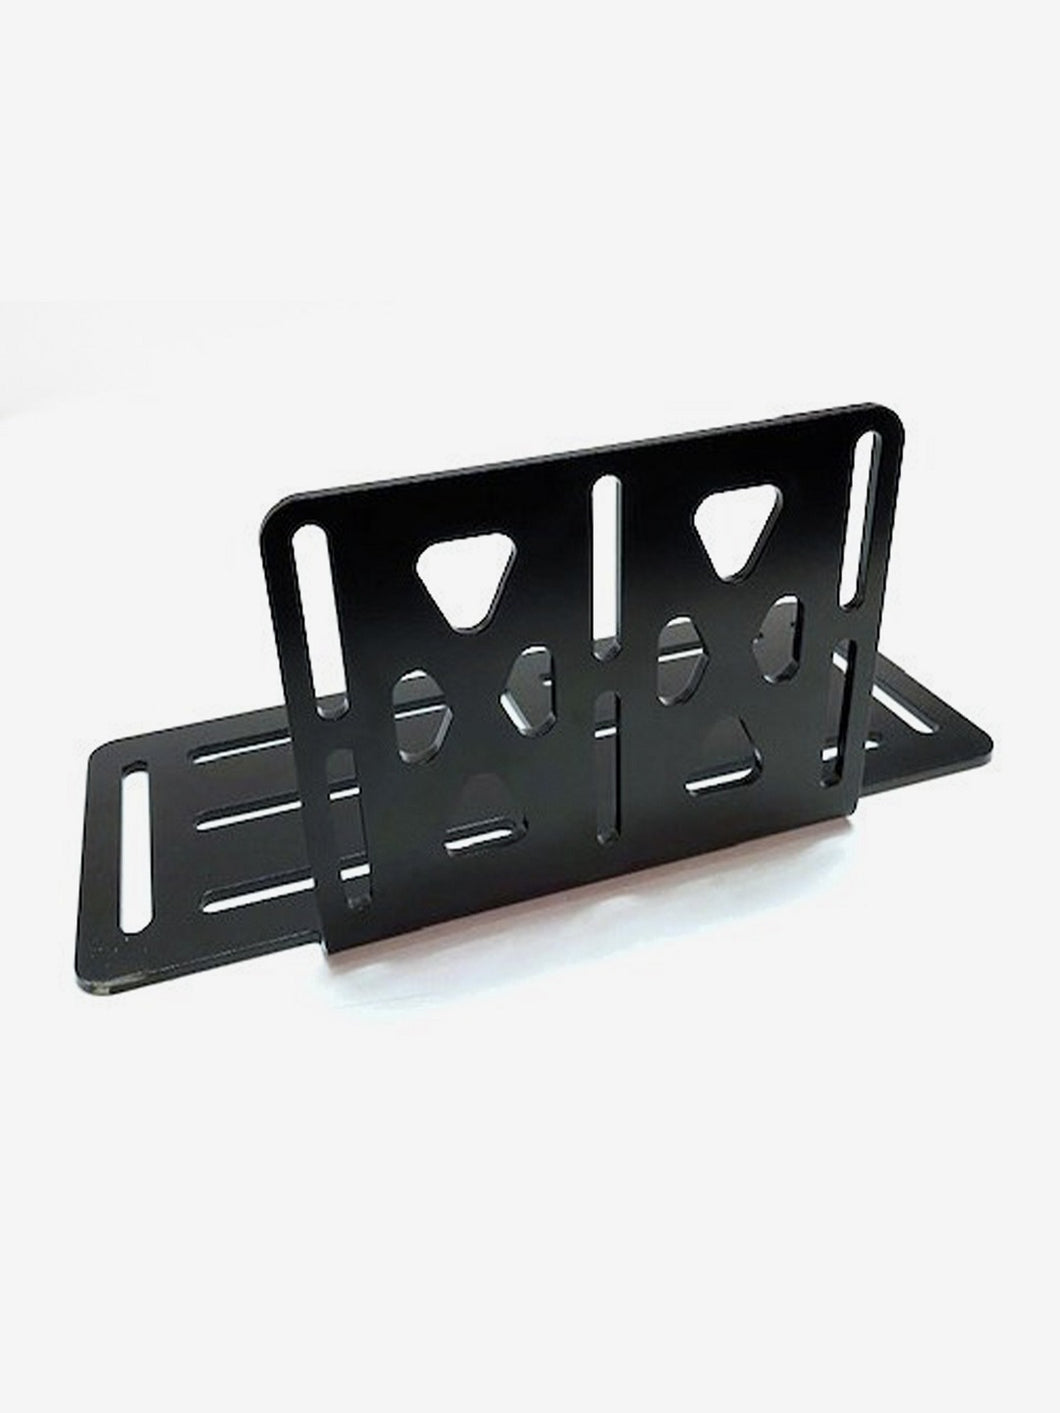 Pictured is a black Platform Rack Mount made from Steel. Perfect for your Canada roof top tent camping trip! Available for sale by SMRT Tent in Edmonton, Canada.